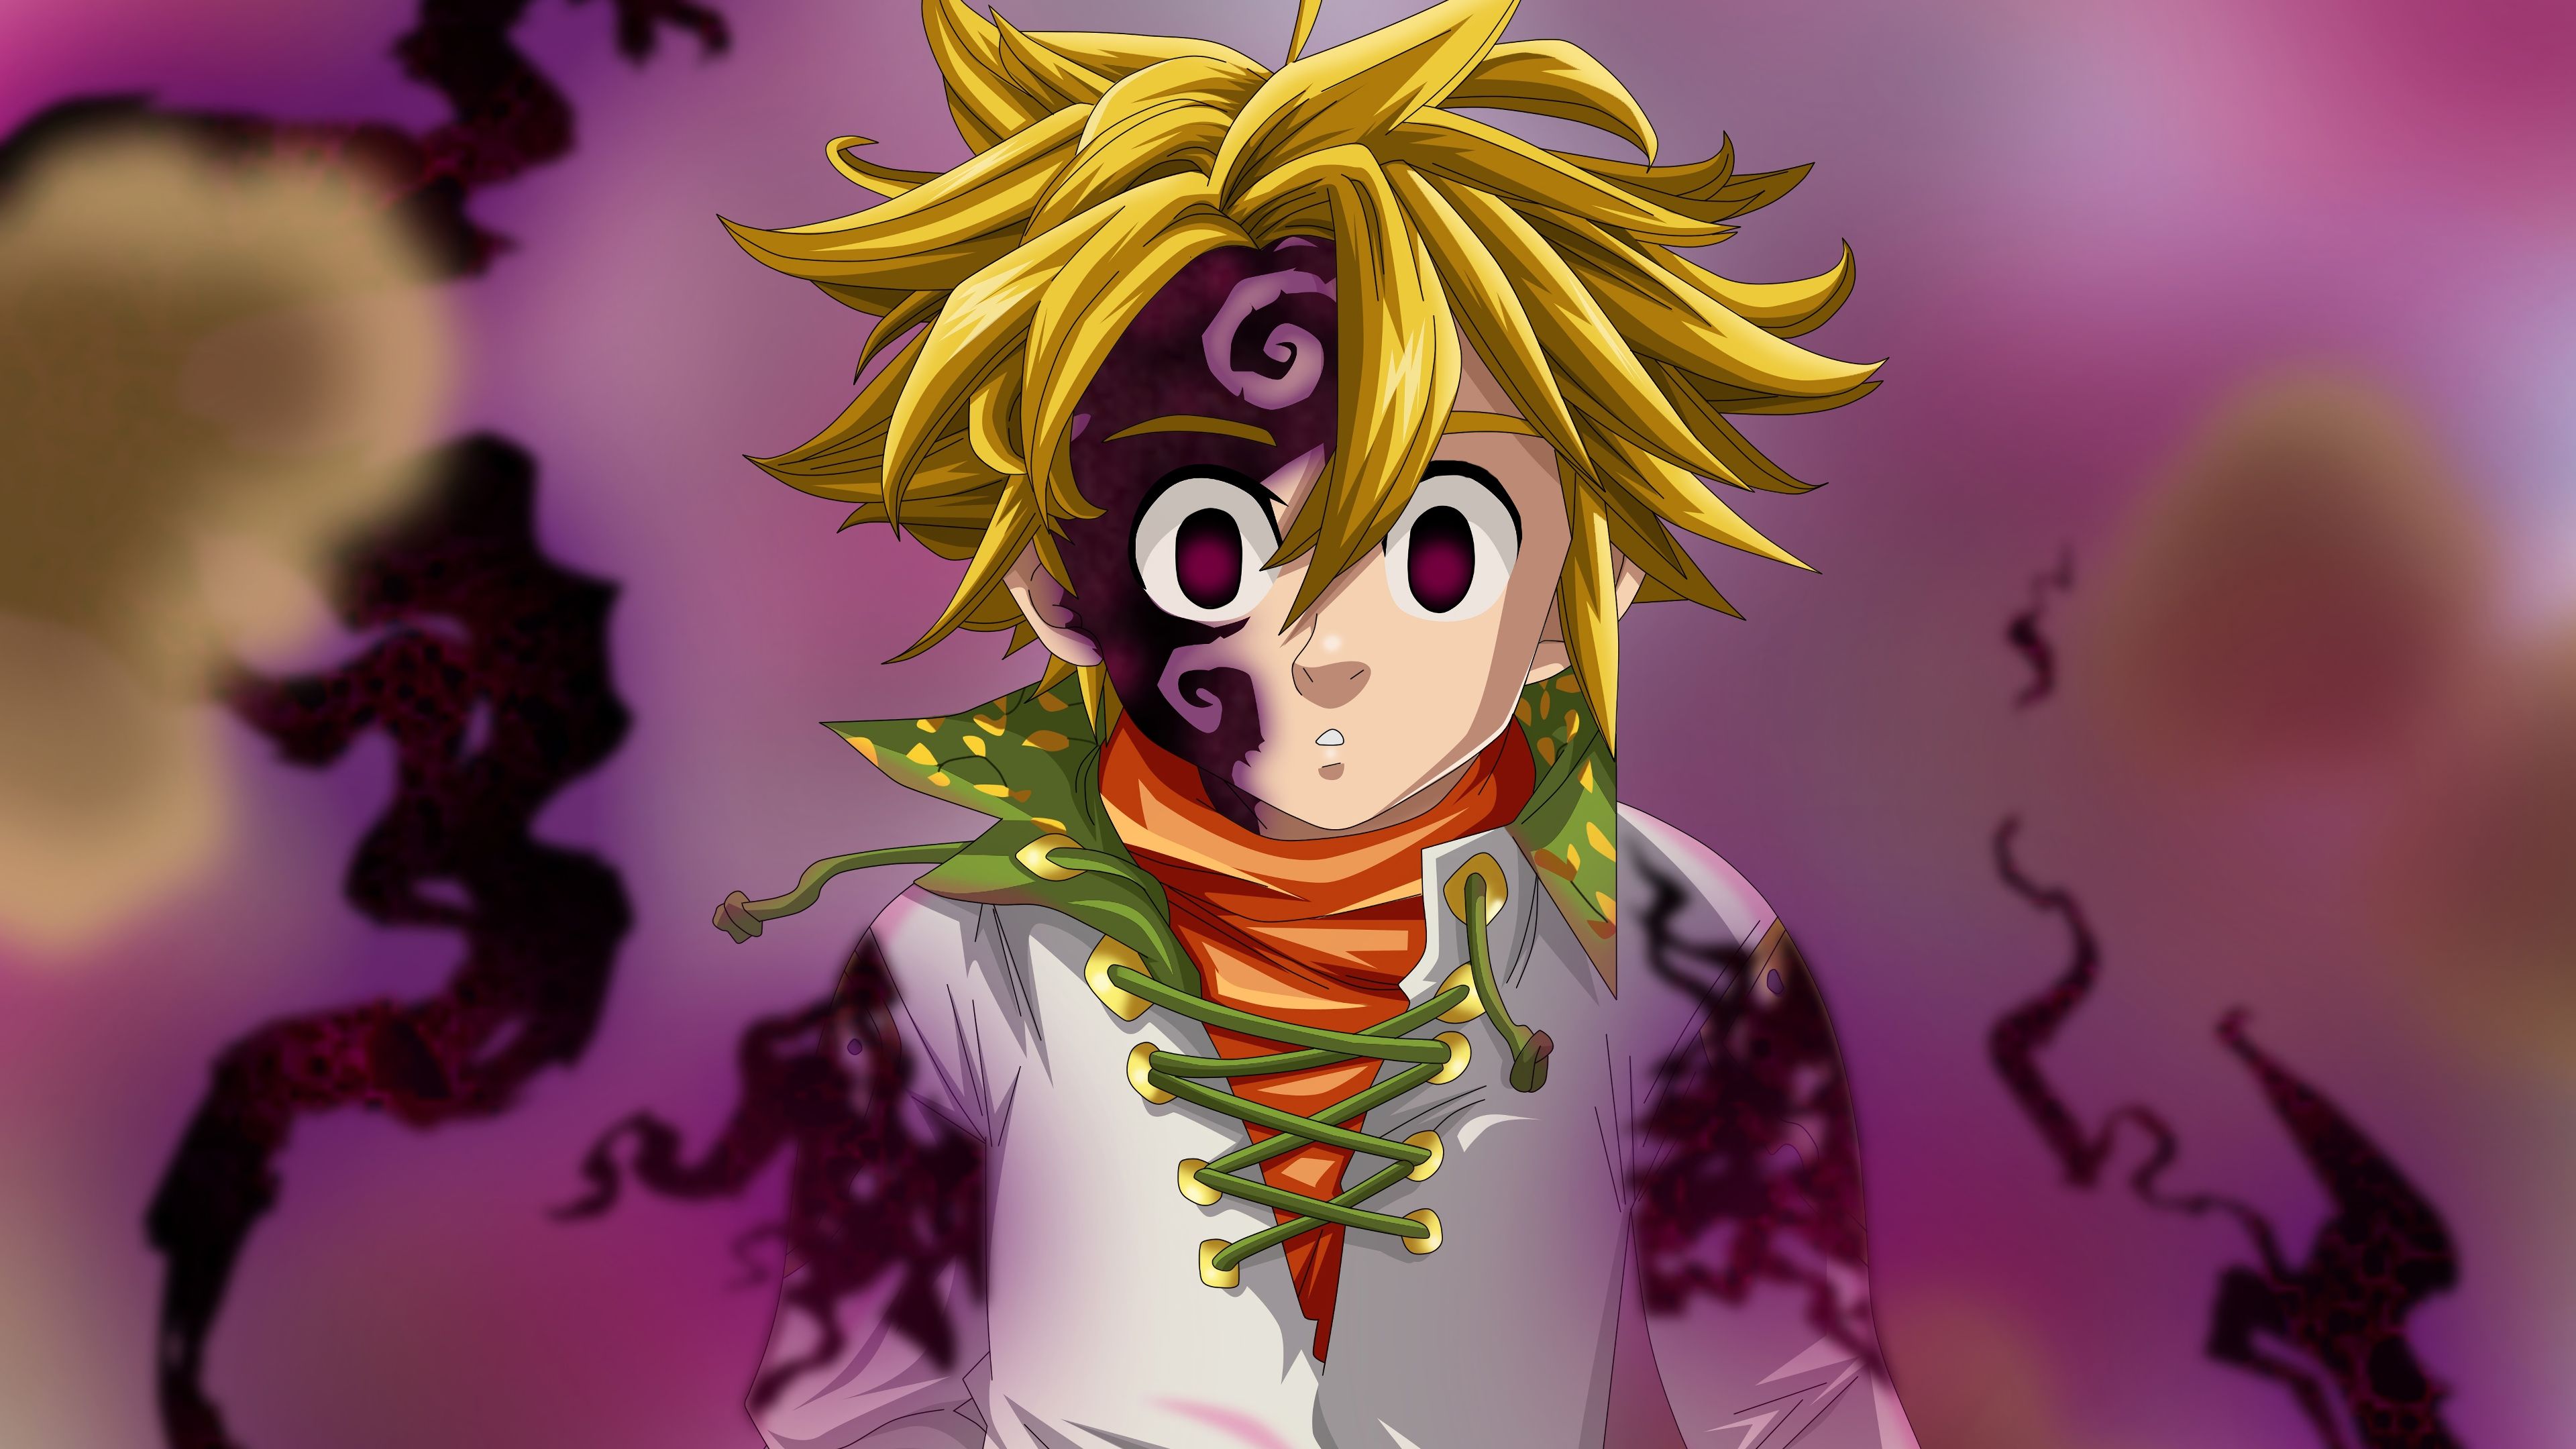 4K Meliodas (The Seven Deadly Sins) Wallpaper and Background Image